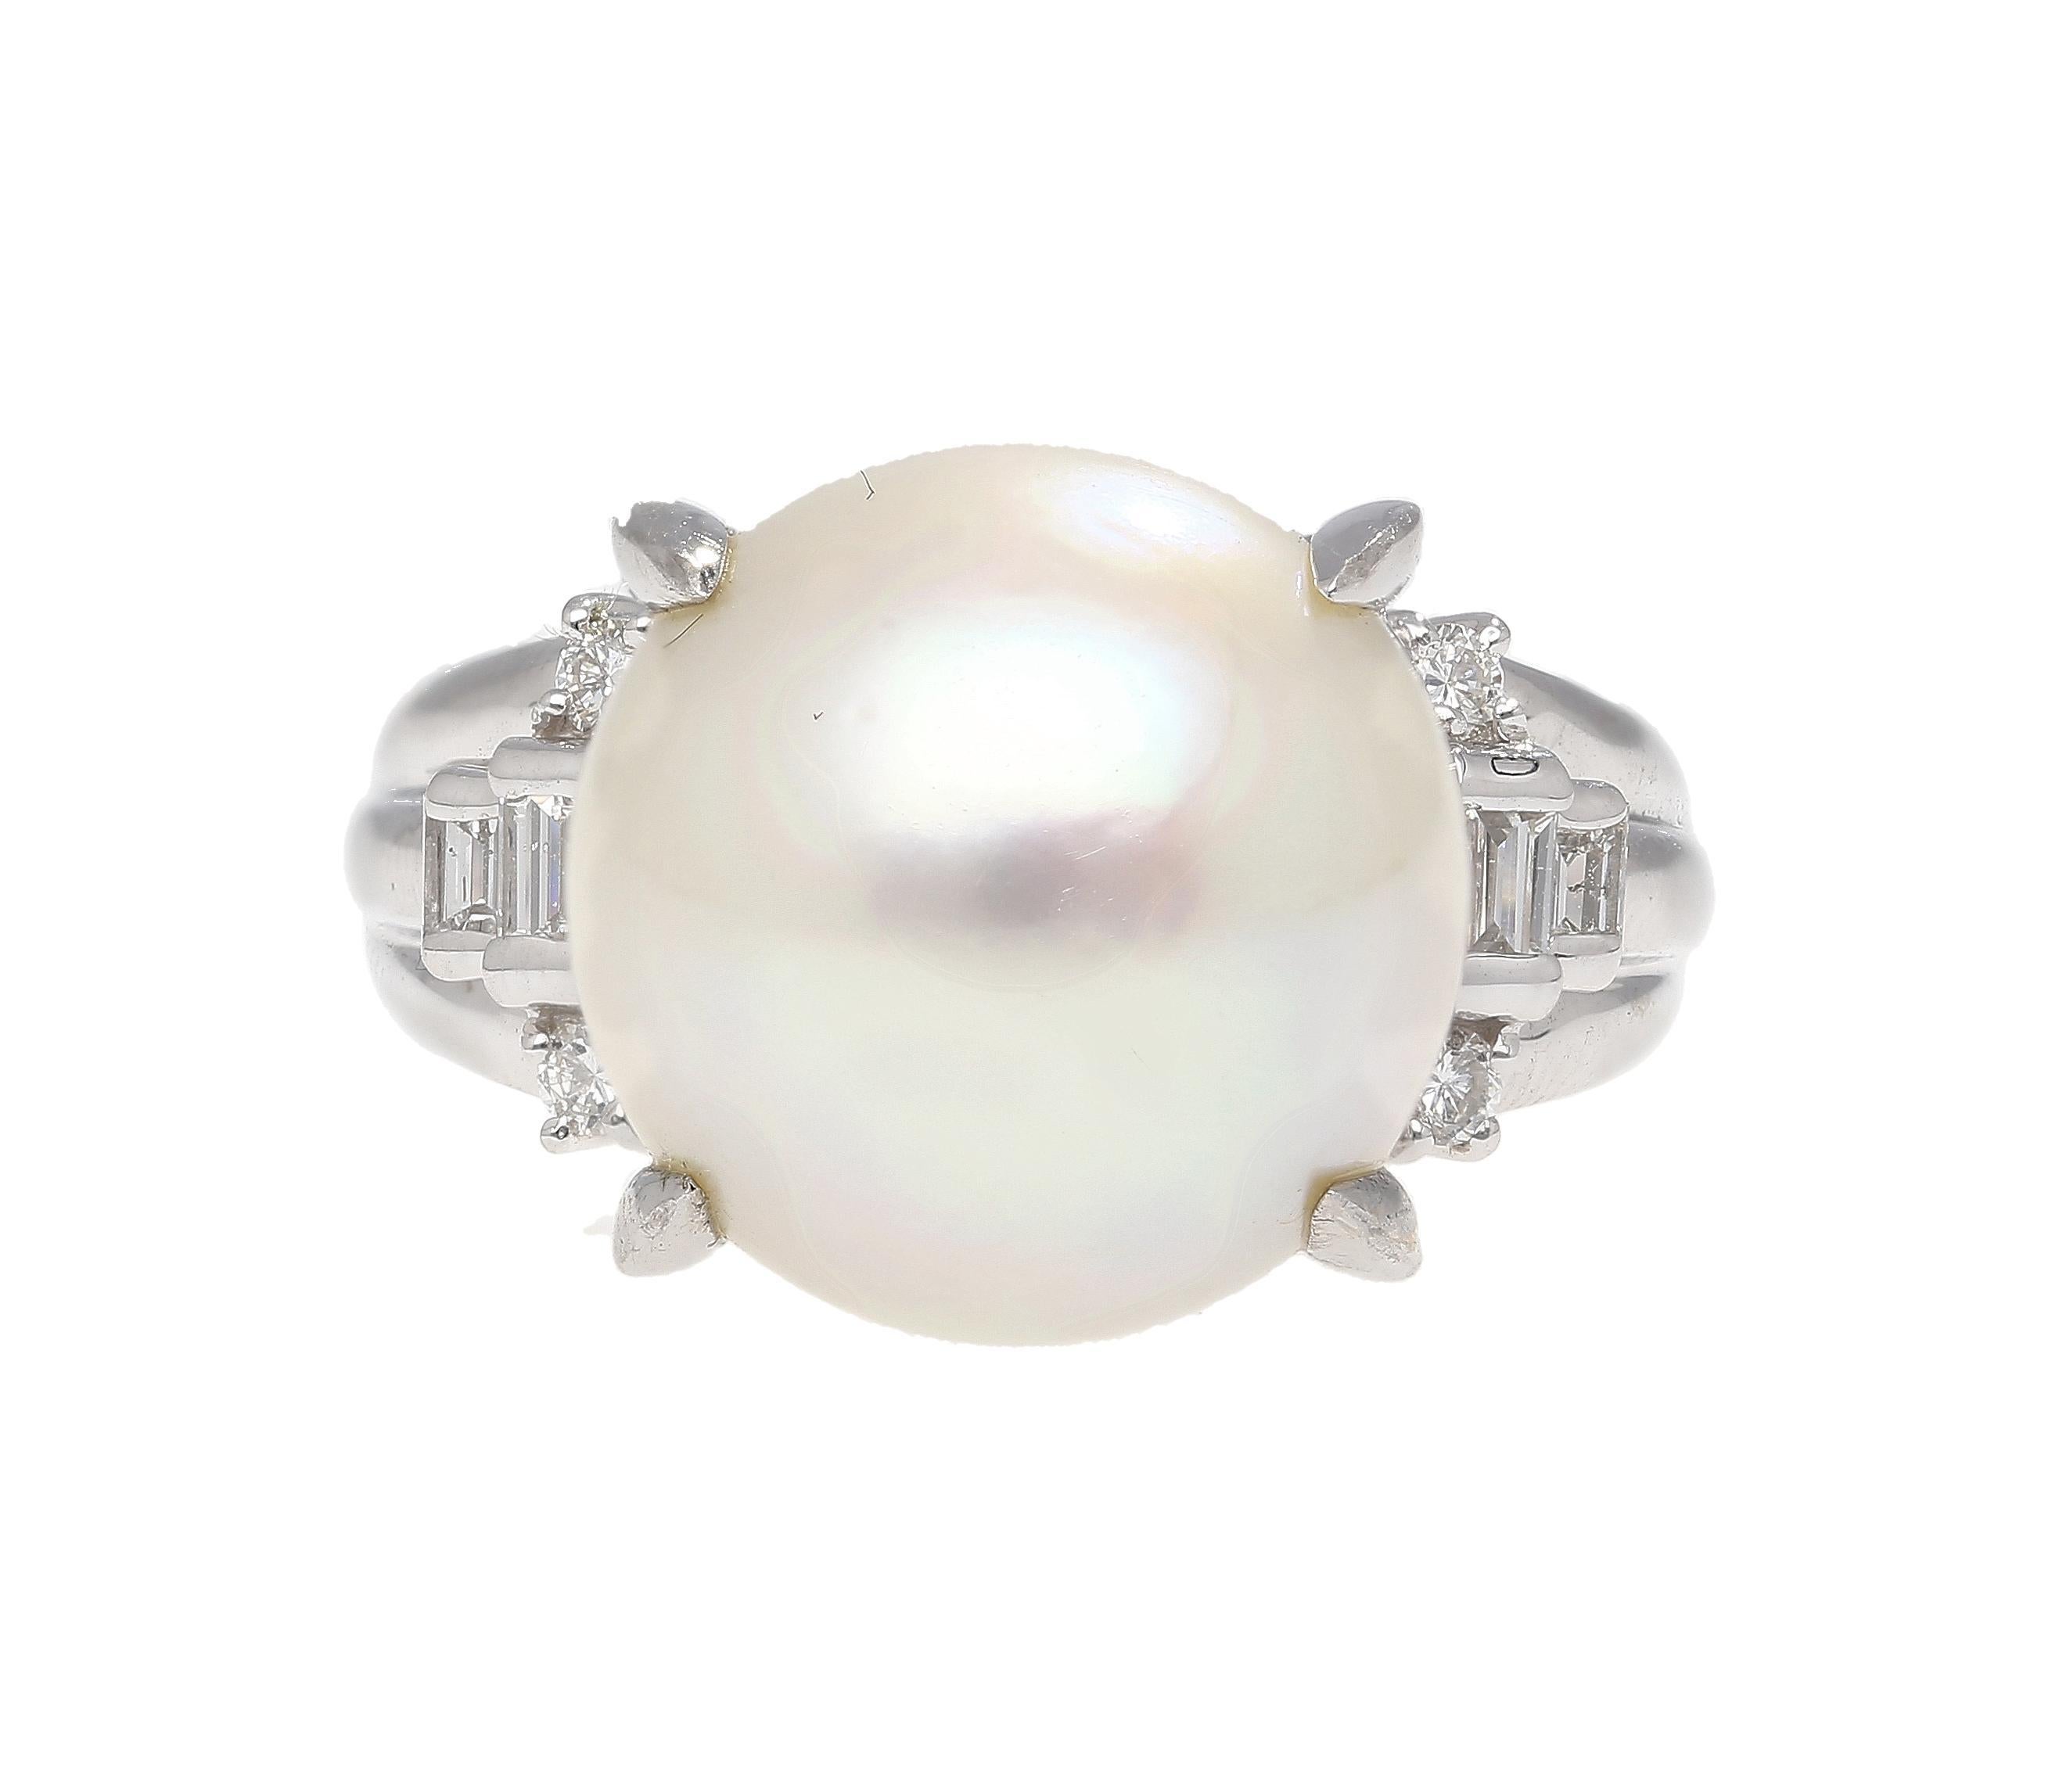 15mm South Sea Pearl and Diamond Platinum Cocktail Ring with Heart Shape Design For Sale 2